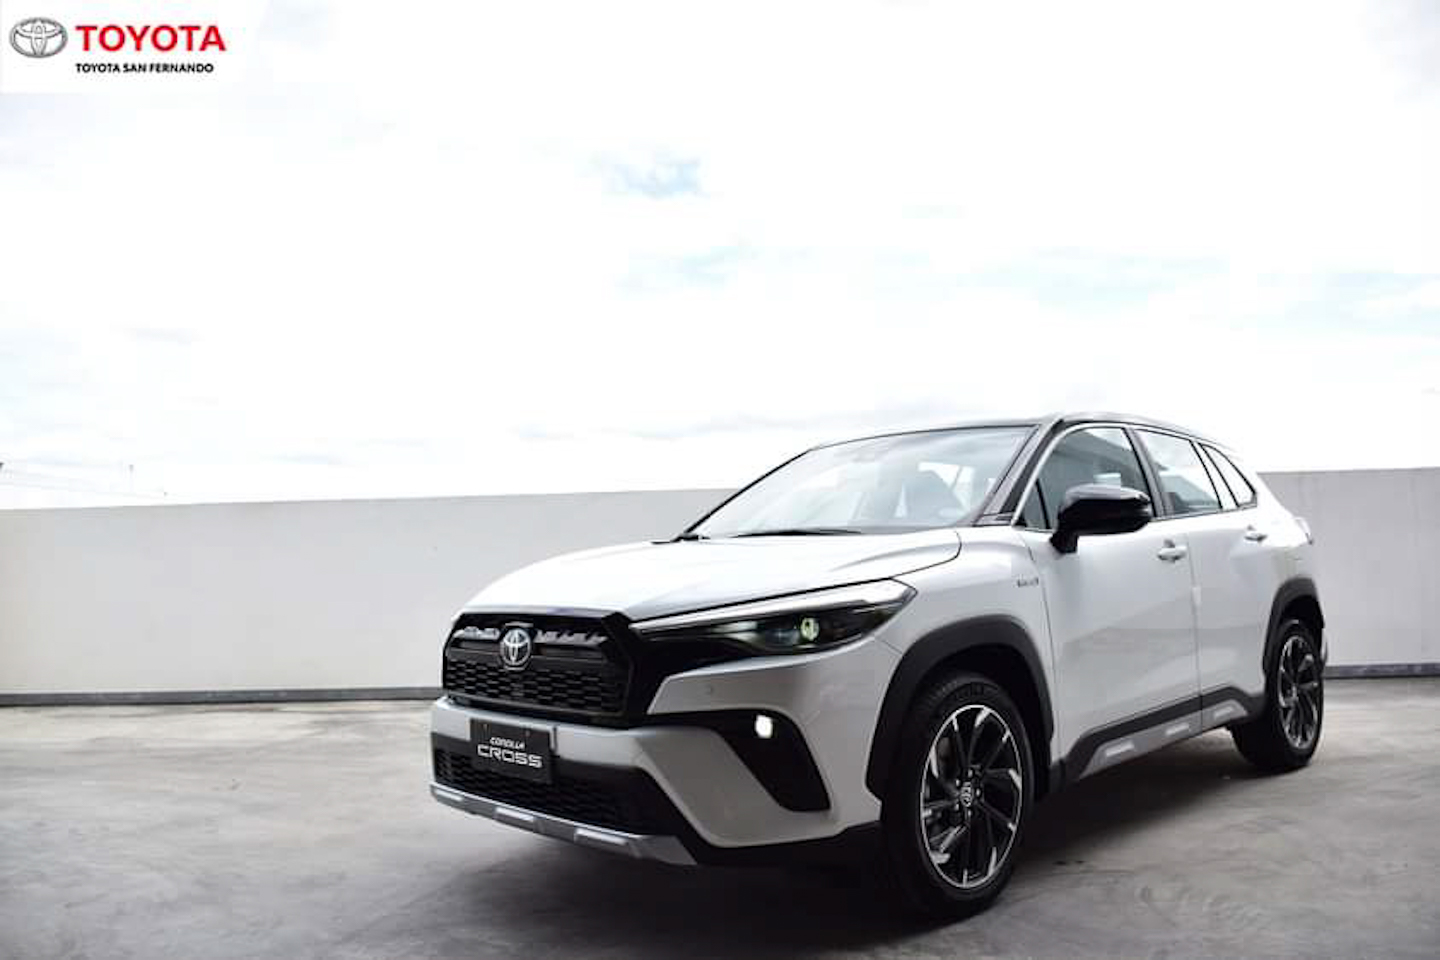 Toyota Corolla Cross gets update and price bump for 2023